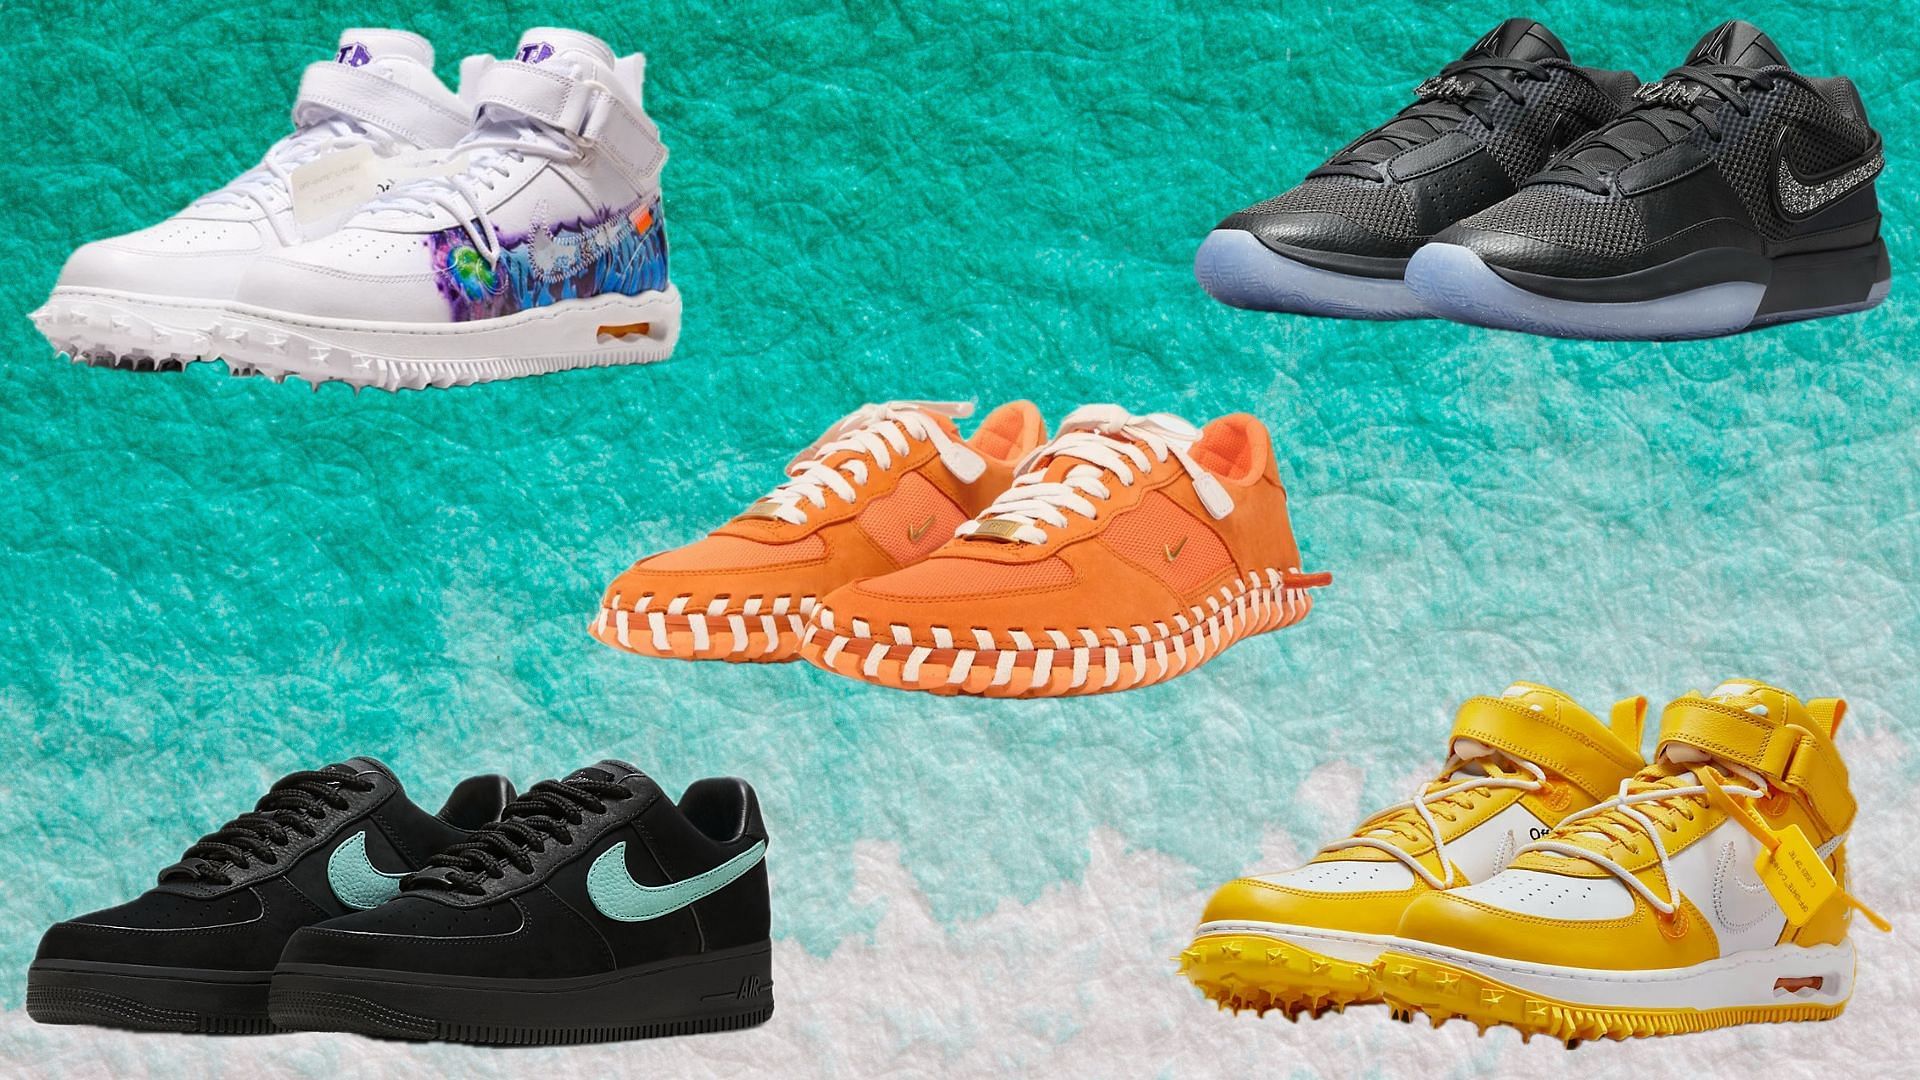 Five luxurious Nike brand collabs that thrilled sneakerheads in 2023 (Image via Nike)